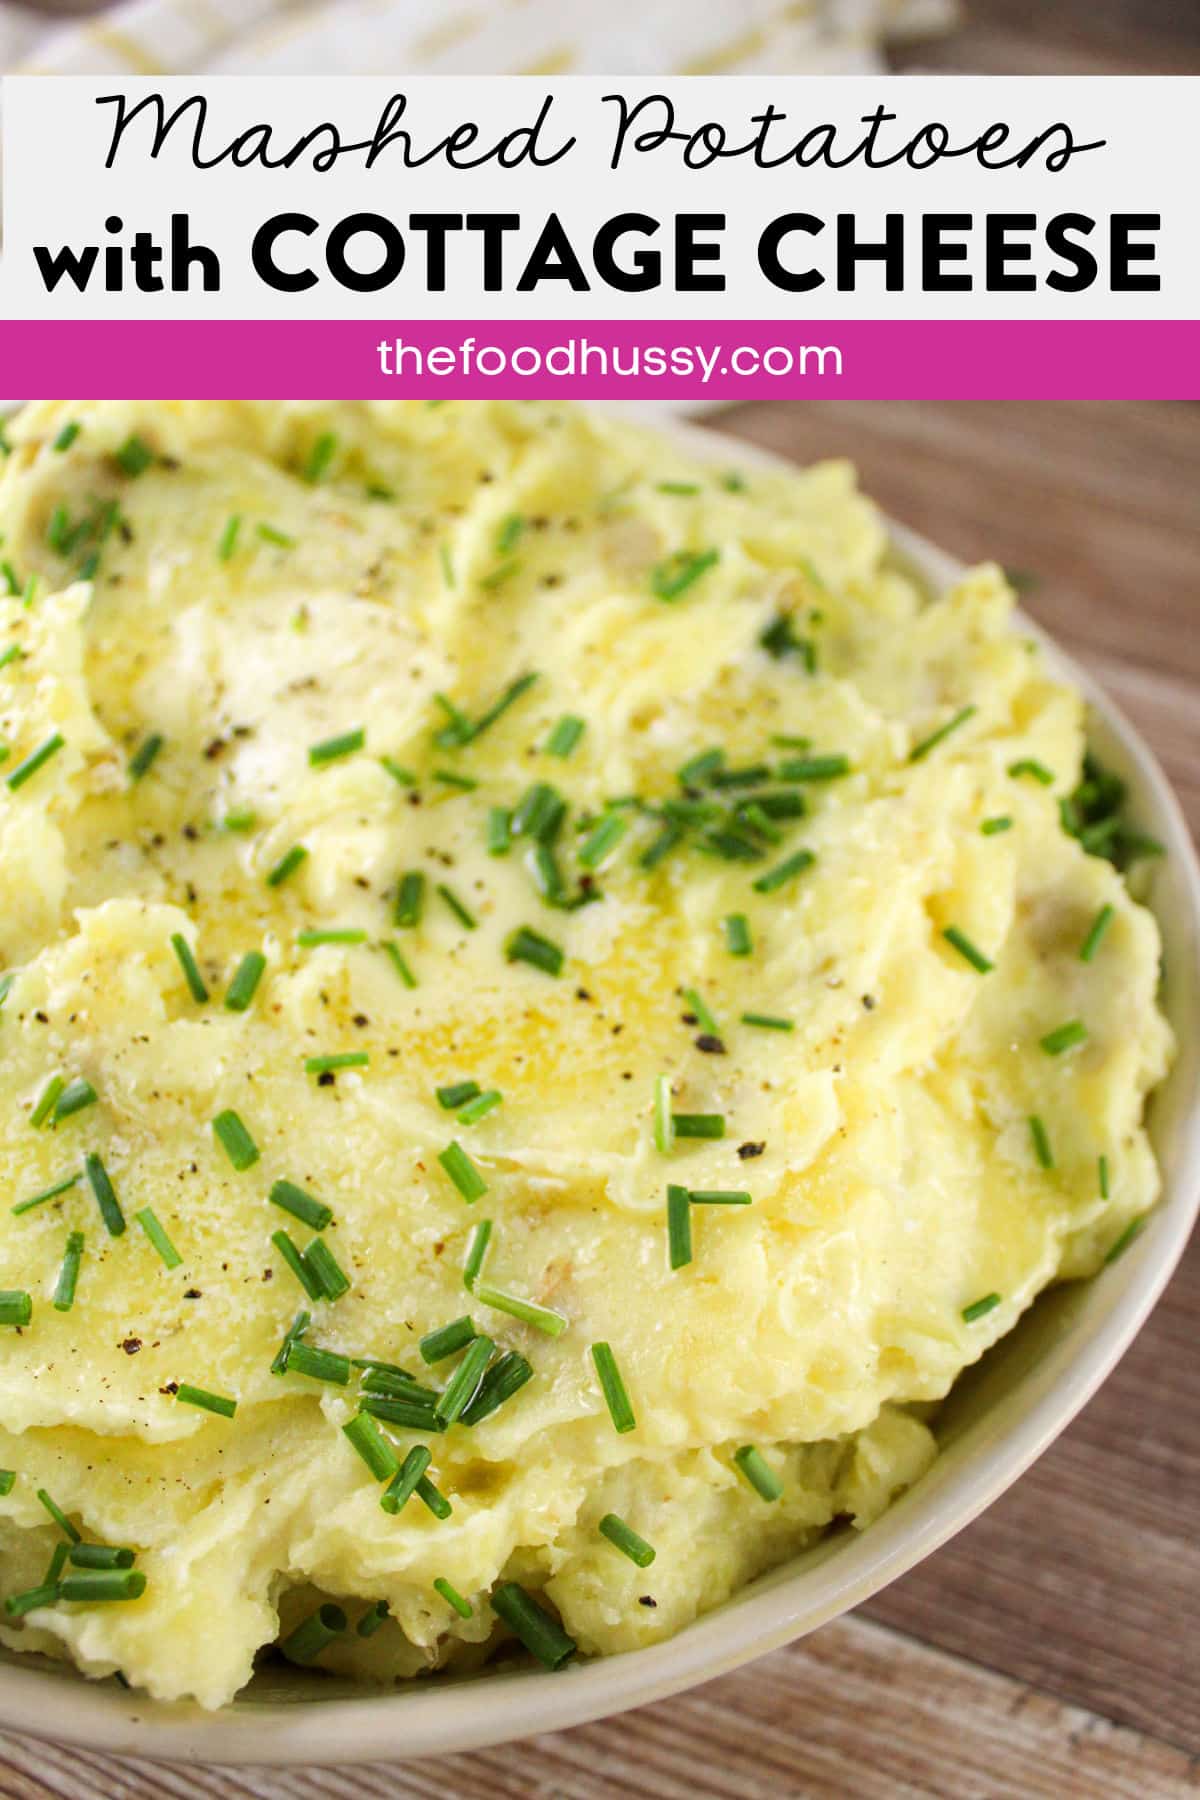 Roasted Garlic Mashed Potatoes with Cottage Cheese are my new favorite way to make mashed taters! They've got that creamy texture and are so full of rich flavor from the roasted garlic! Cottage cheese might seem odd - but trust me - this secret ingredient works! via @foodhussy